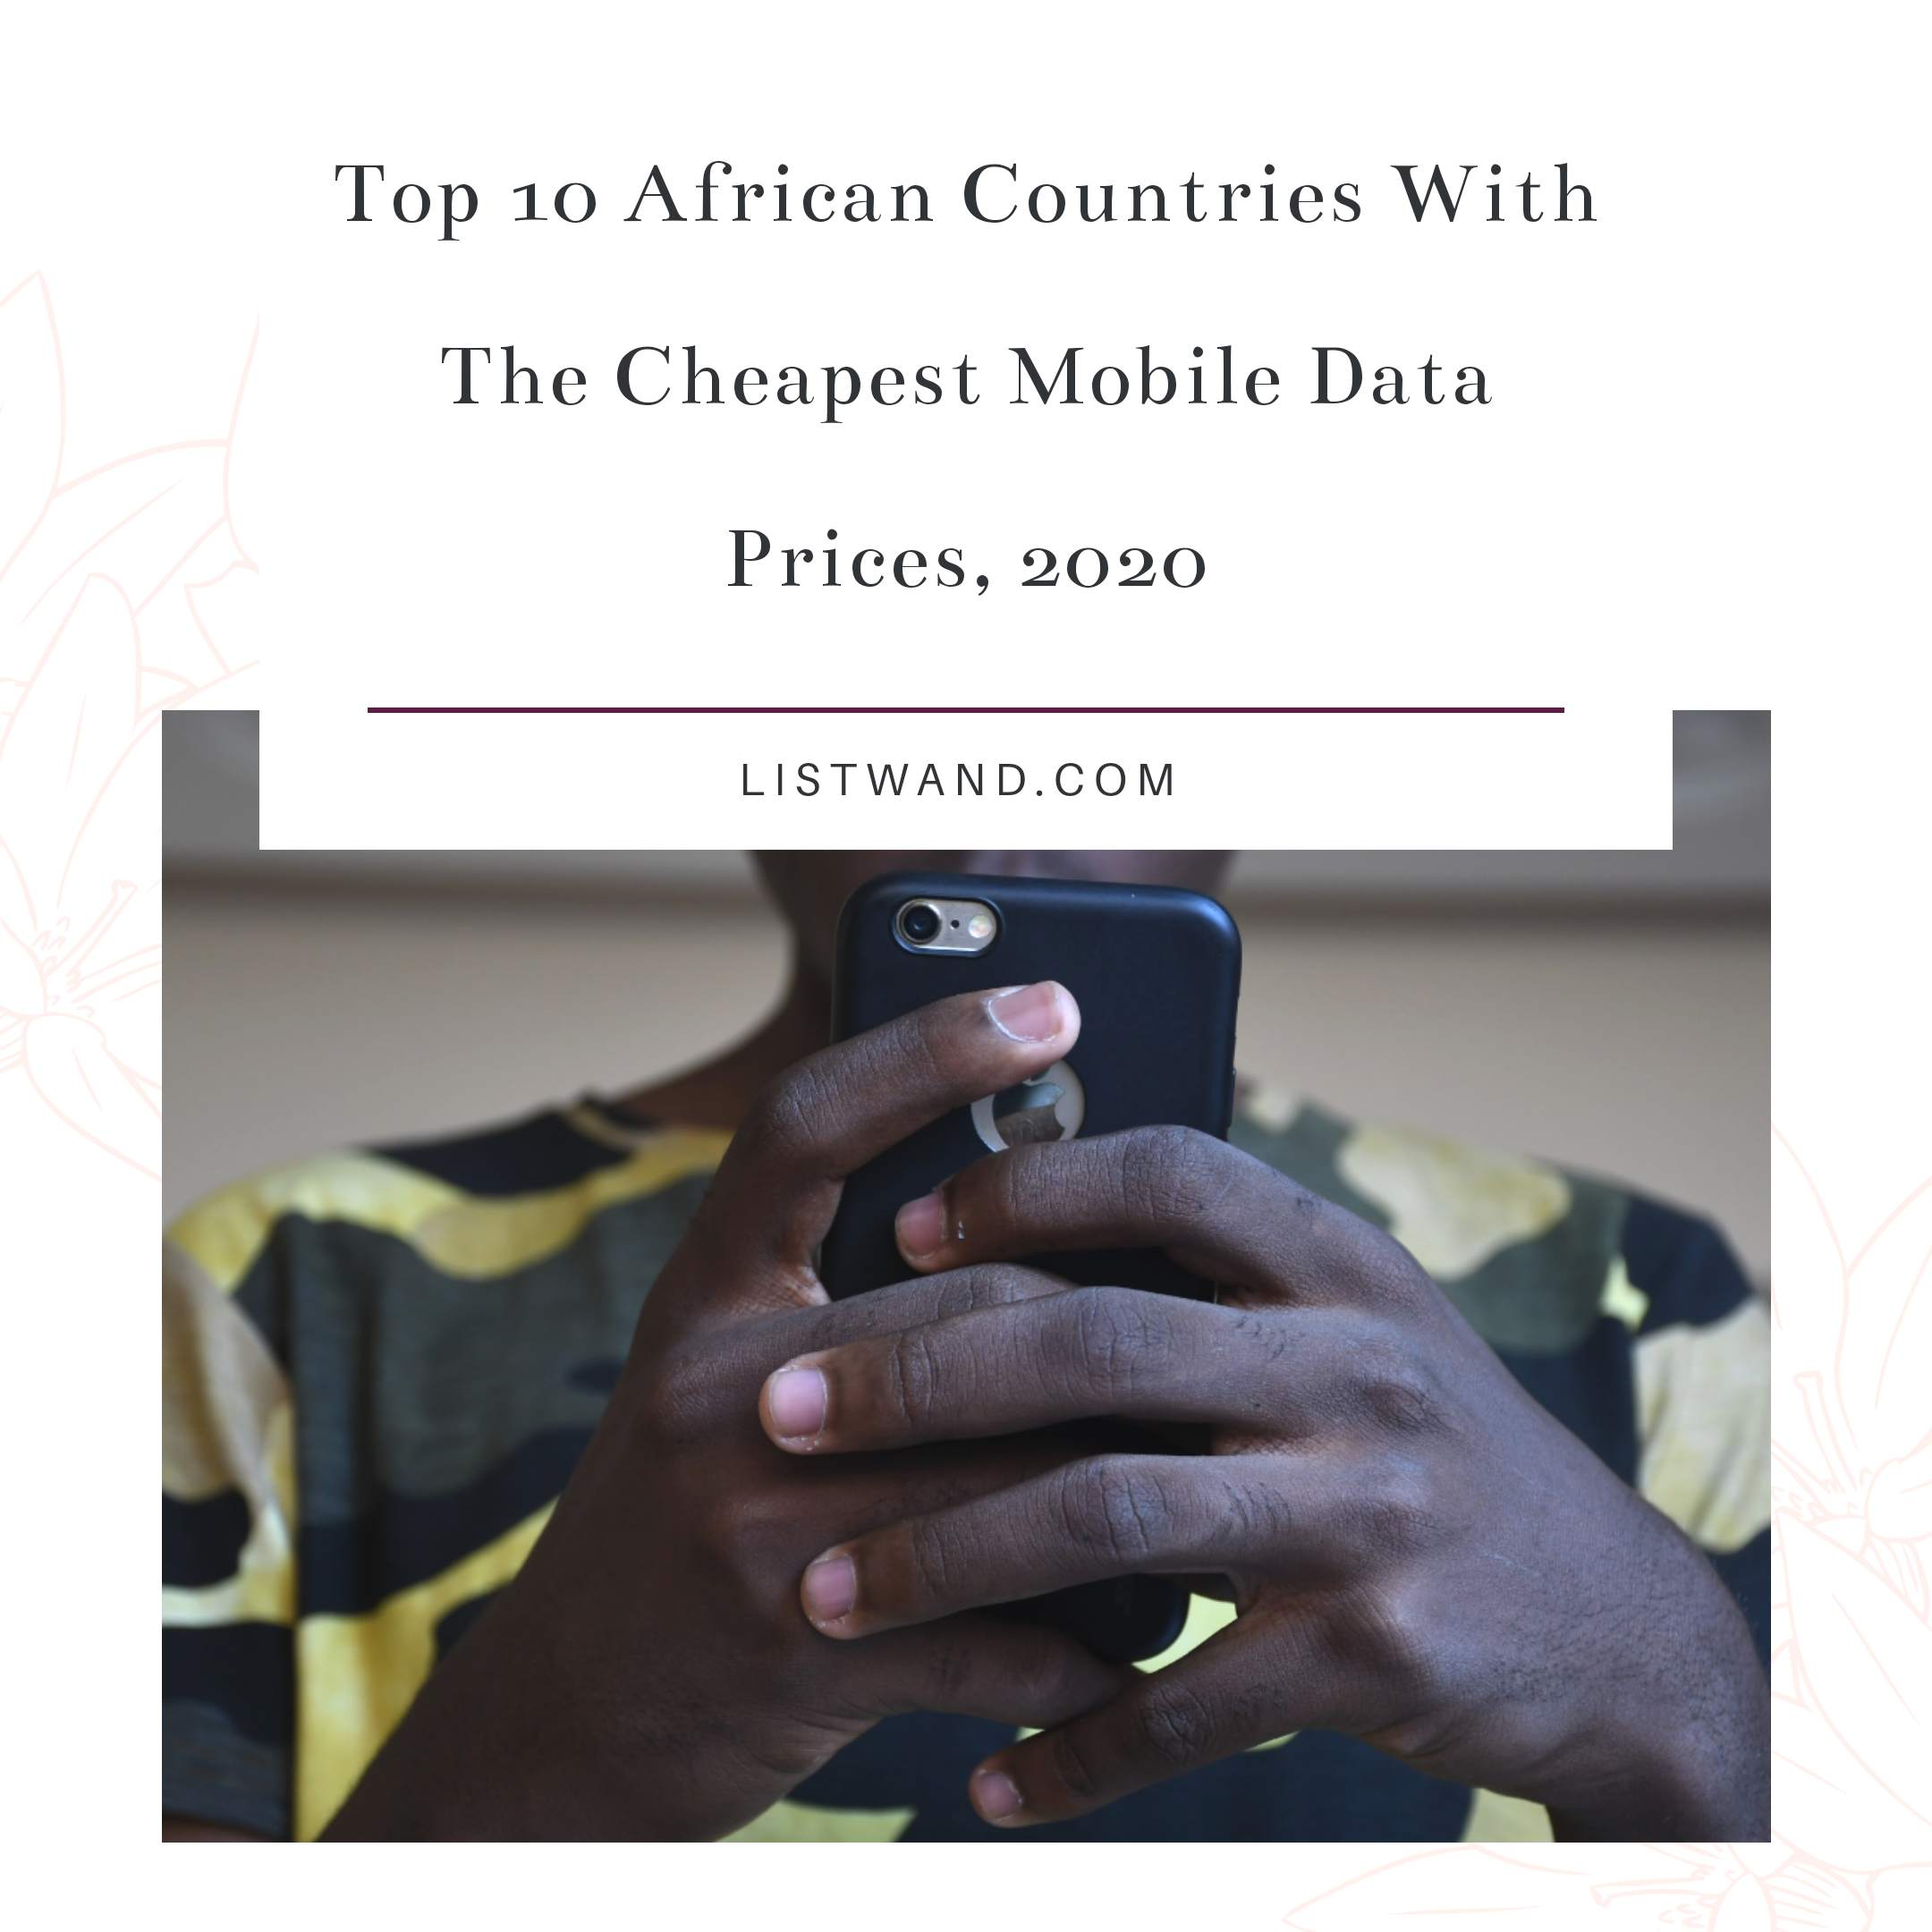 Top 10 African Countries With The Cheapest Mobile Data Prices, 2020